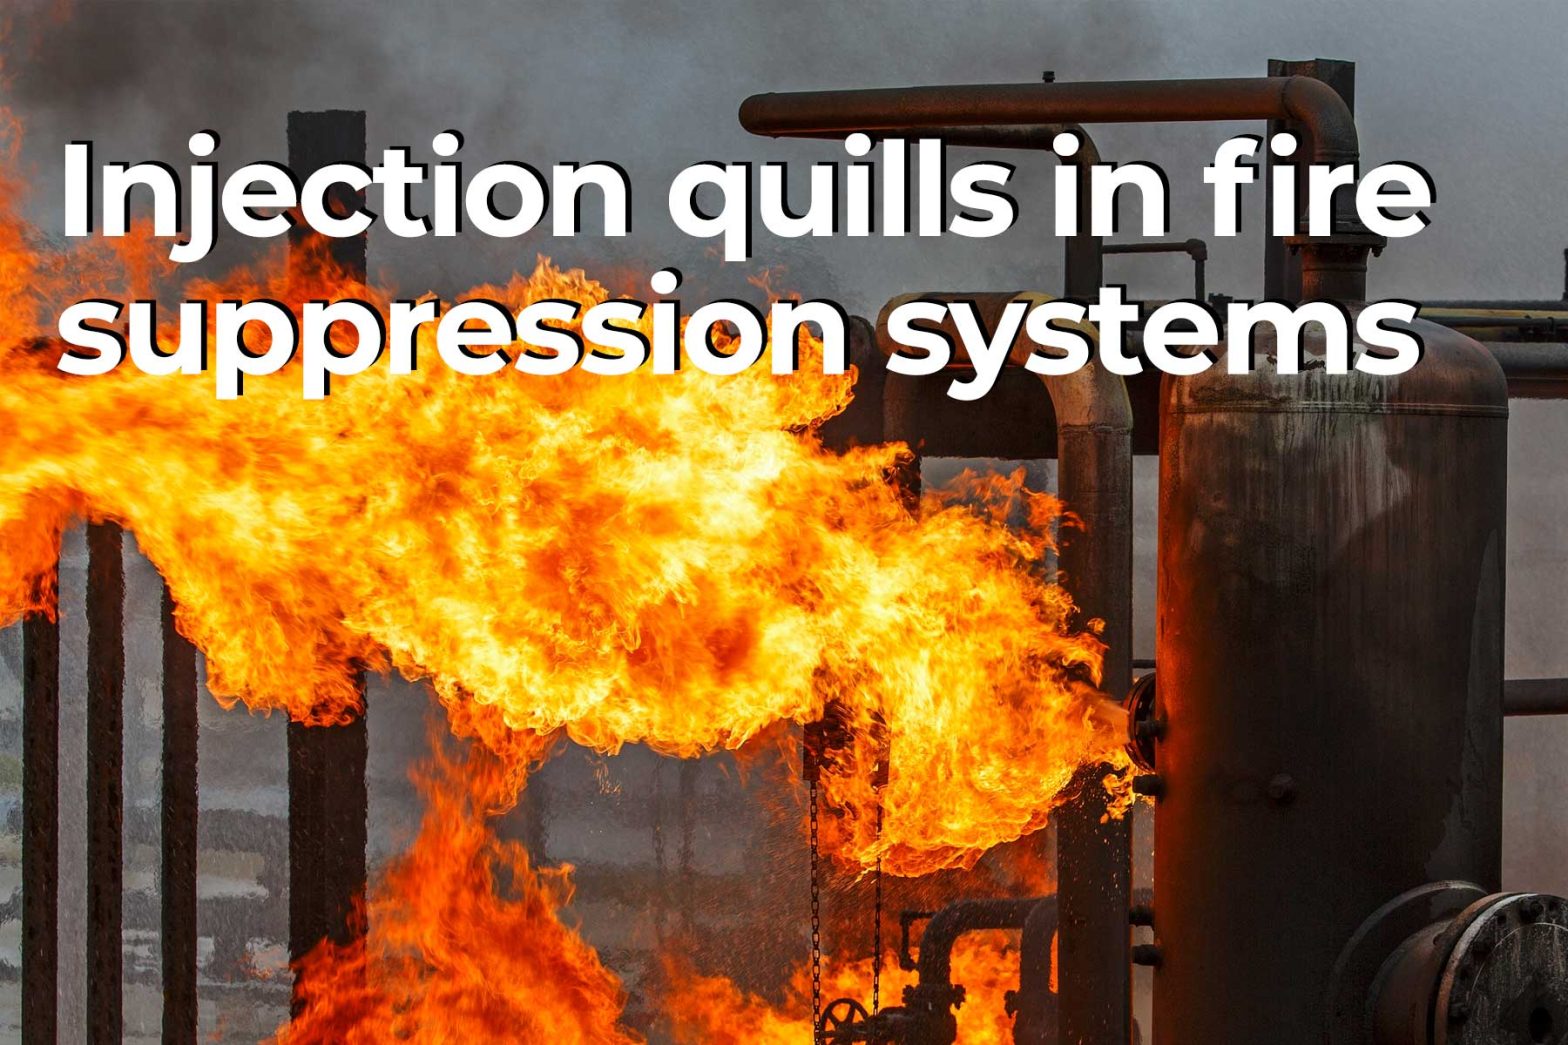 Challenges in using injection quills in fire suppression systems